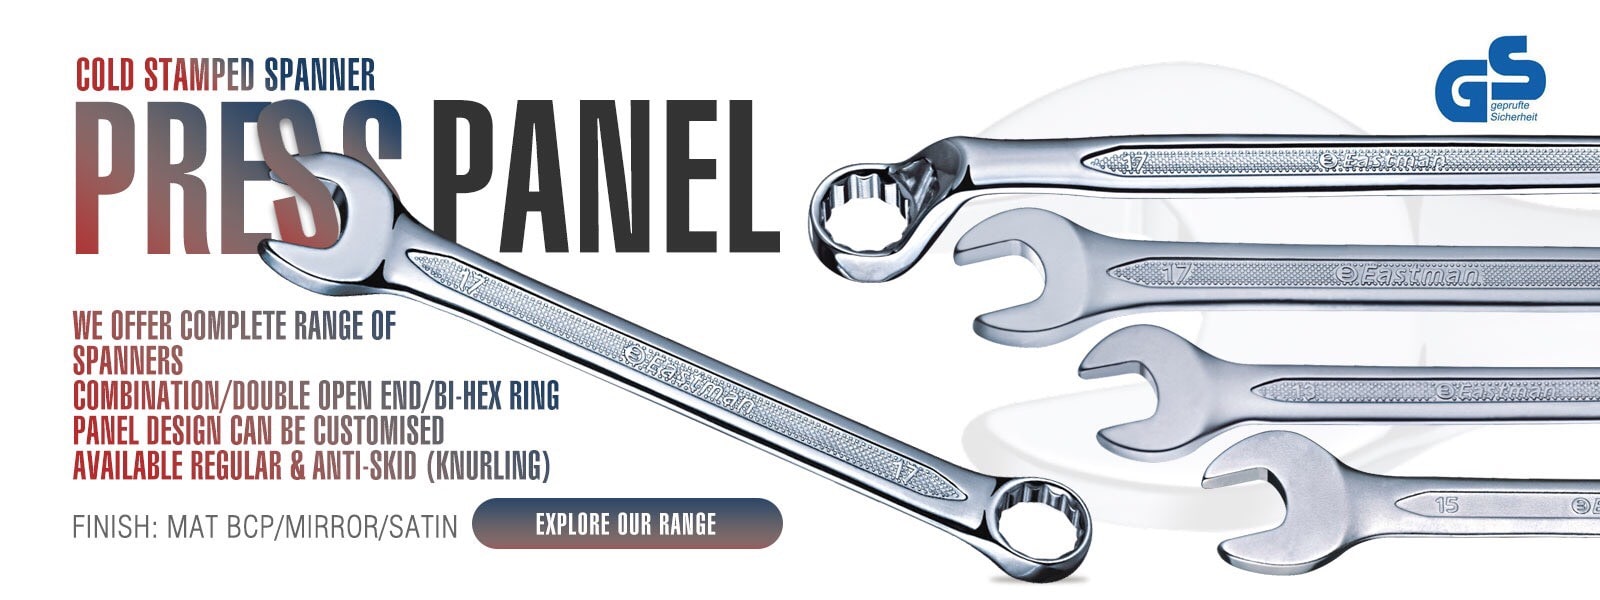 Press-panel-spanner-manufacture-india